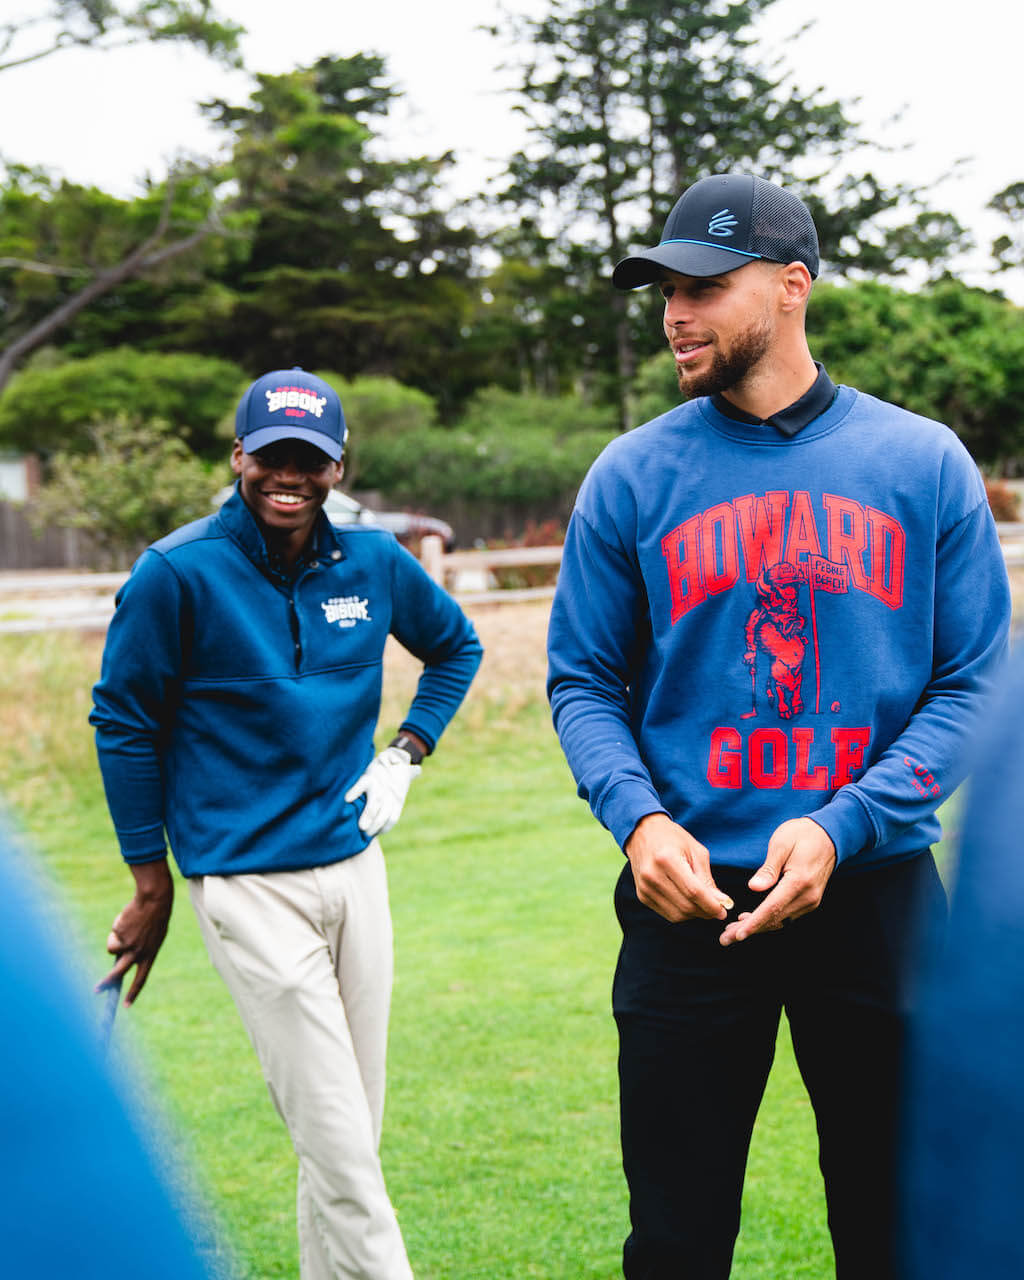 Stephen Curry and Howard golf player